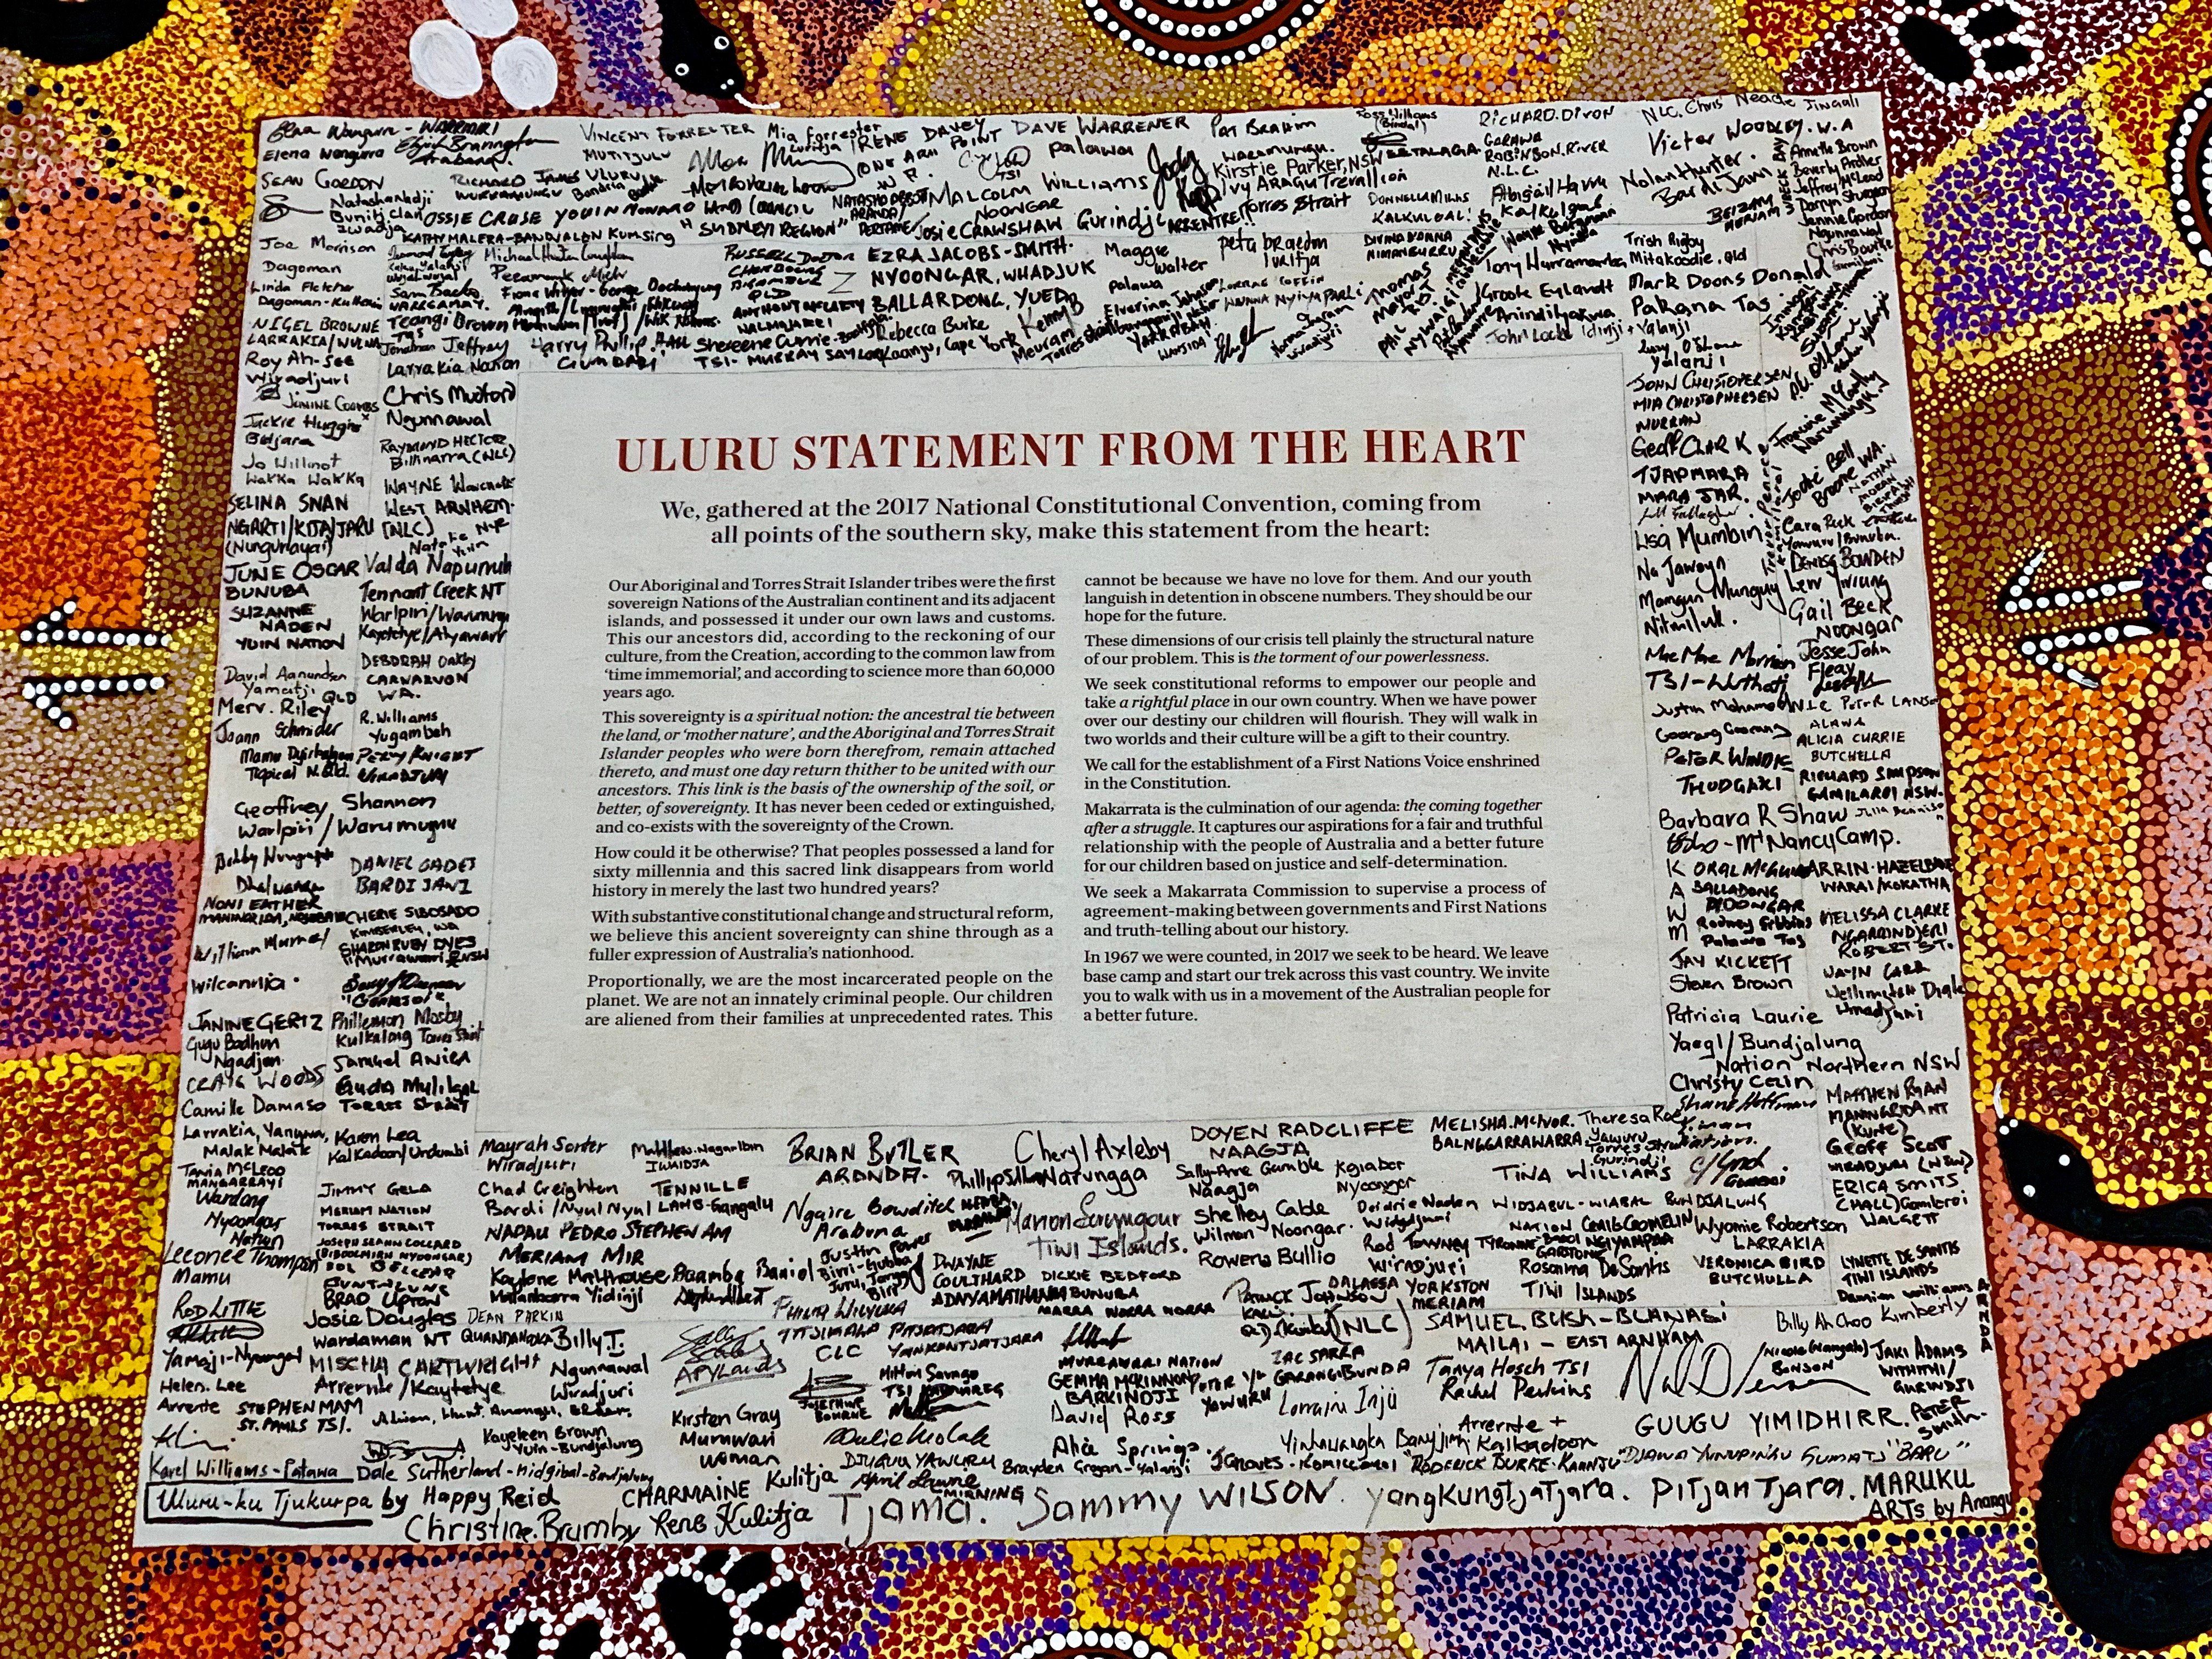 Uluru Statement from the Heart - how can we help?